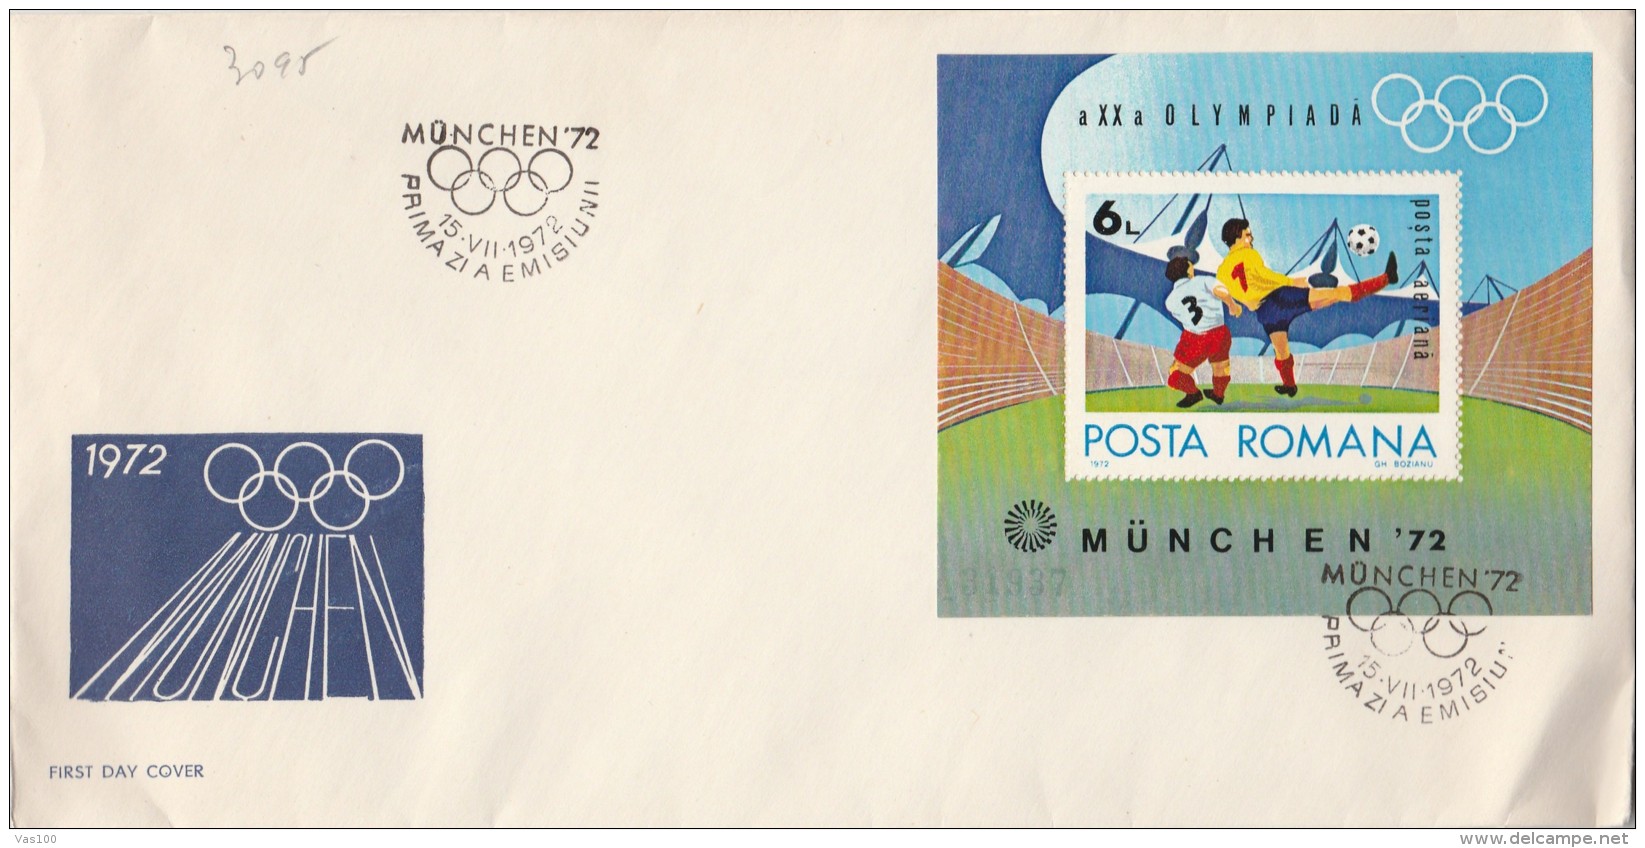 #T233  SOCCER, OLIMPIC GAMES, MUNCHEN'72 ,COVERS FDC, BLOCK, 1972, ROMANIA. - FDC